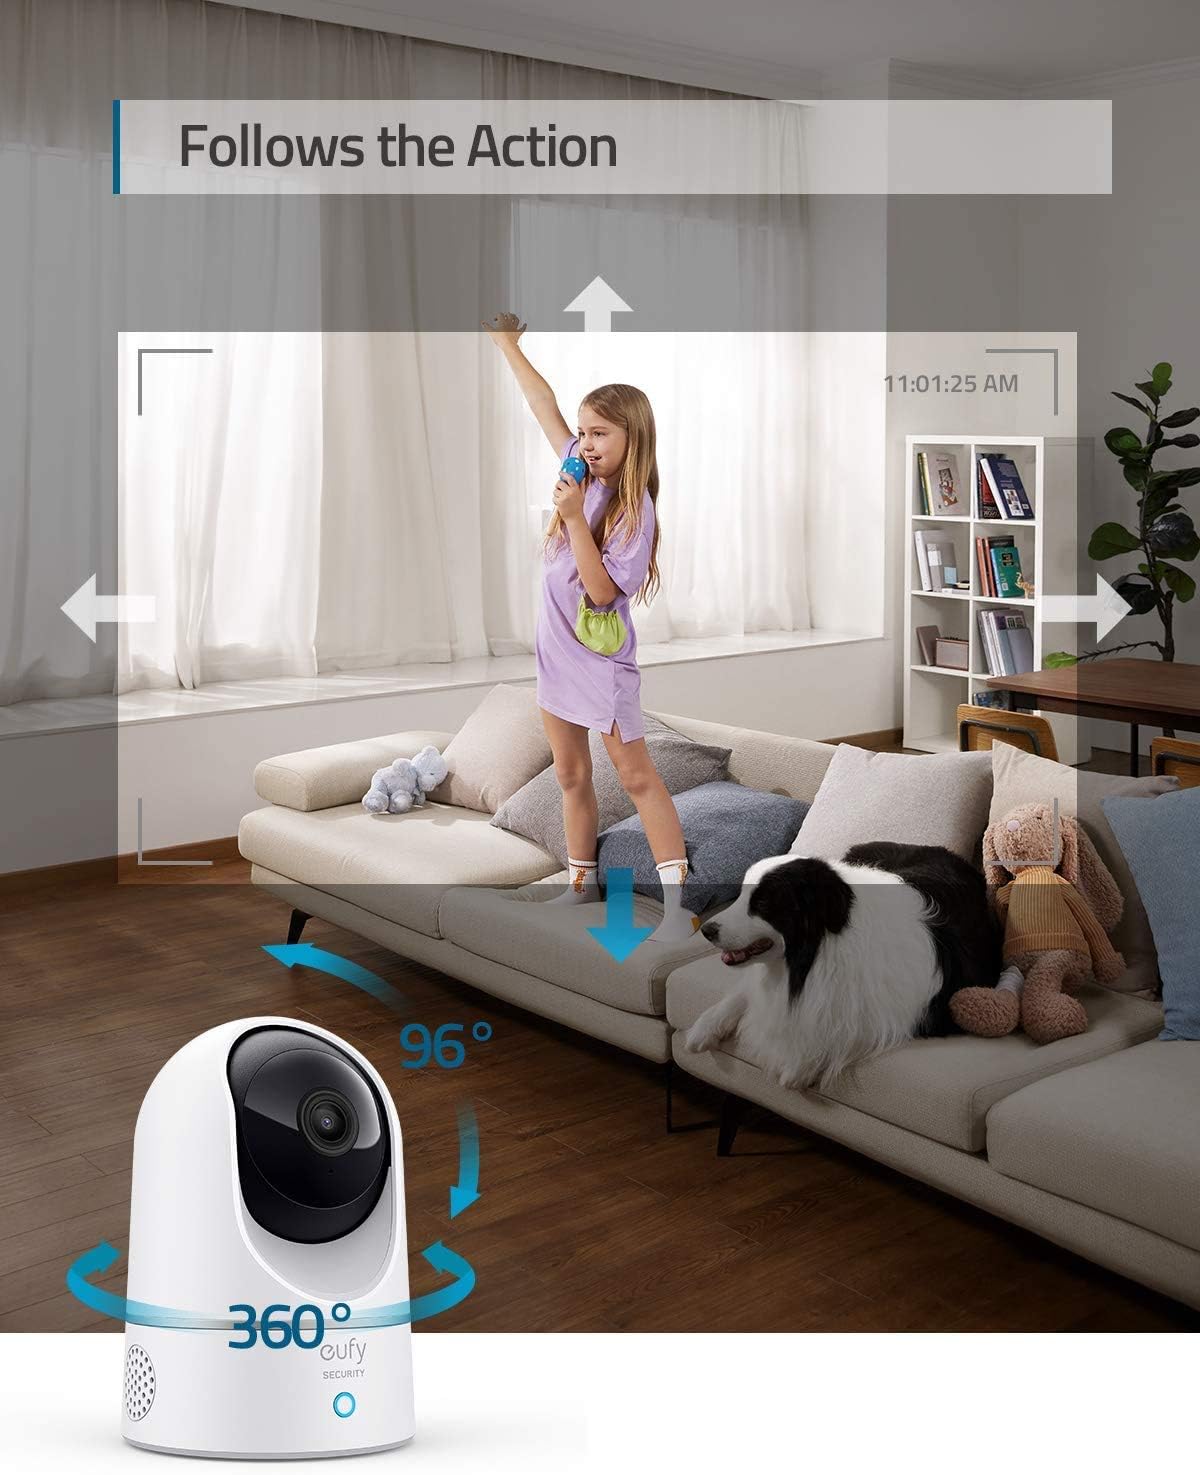 eufy 2K Cam Pan Tilt, Home Security Indoor Camera, with Voice Assistants, Motion Tracking, Night Vision, MicroSD Card Required